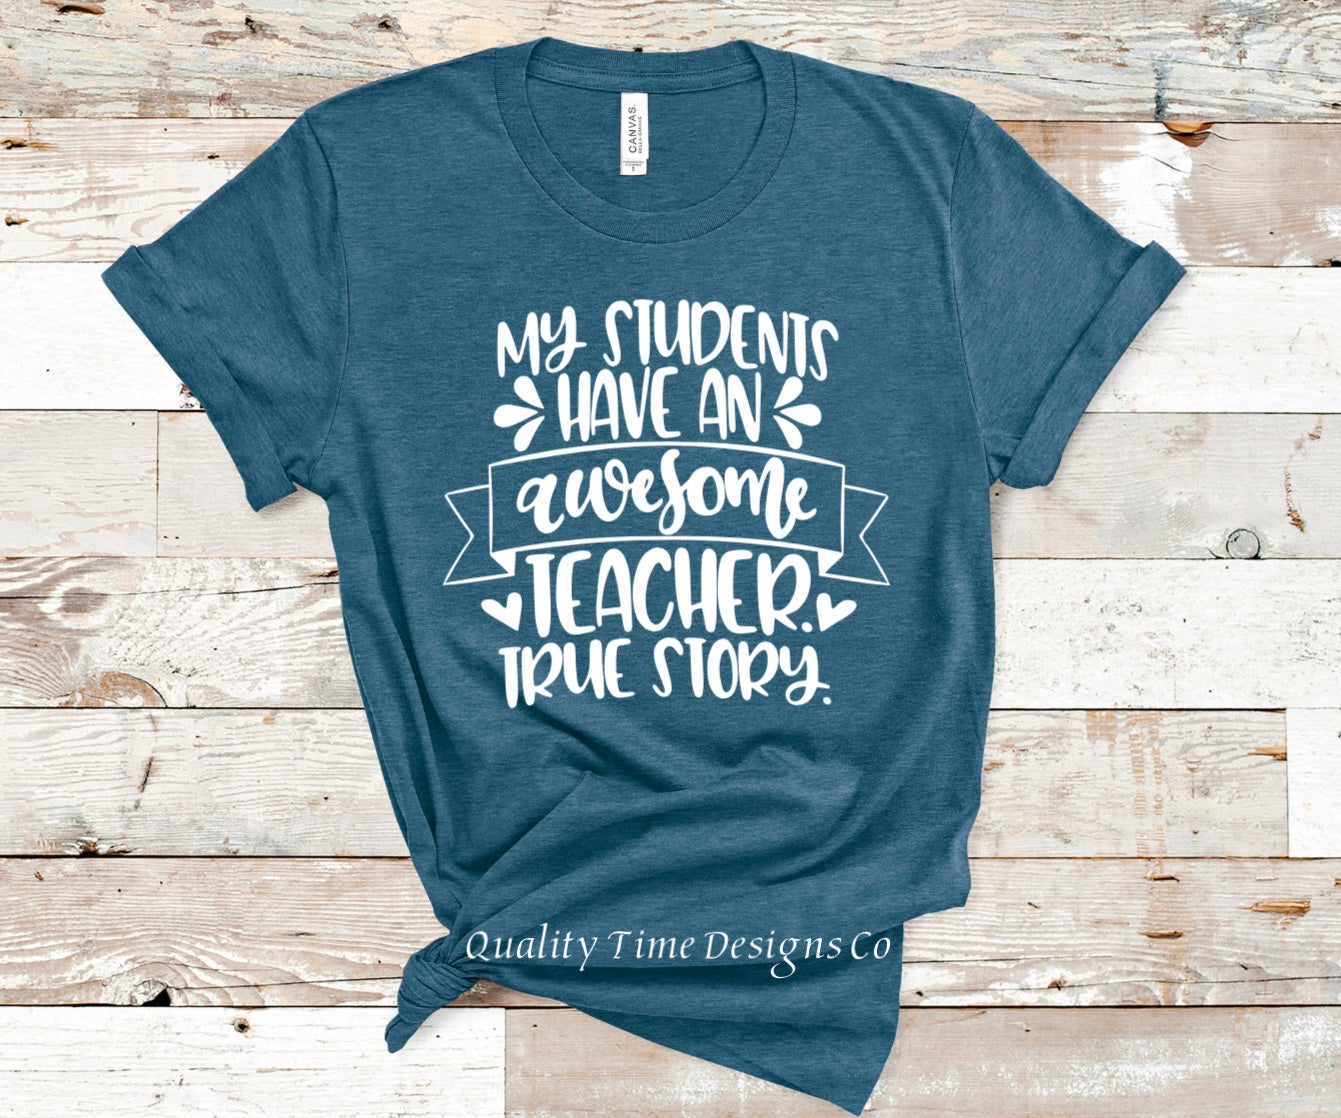 My students have an awesome teacher t-shirt 